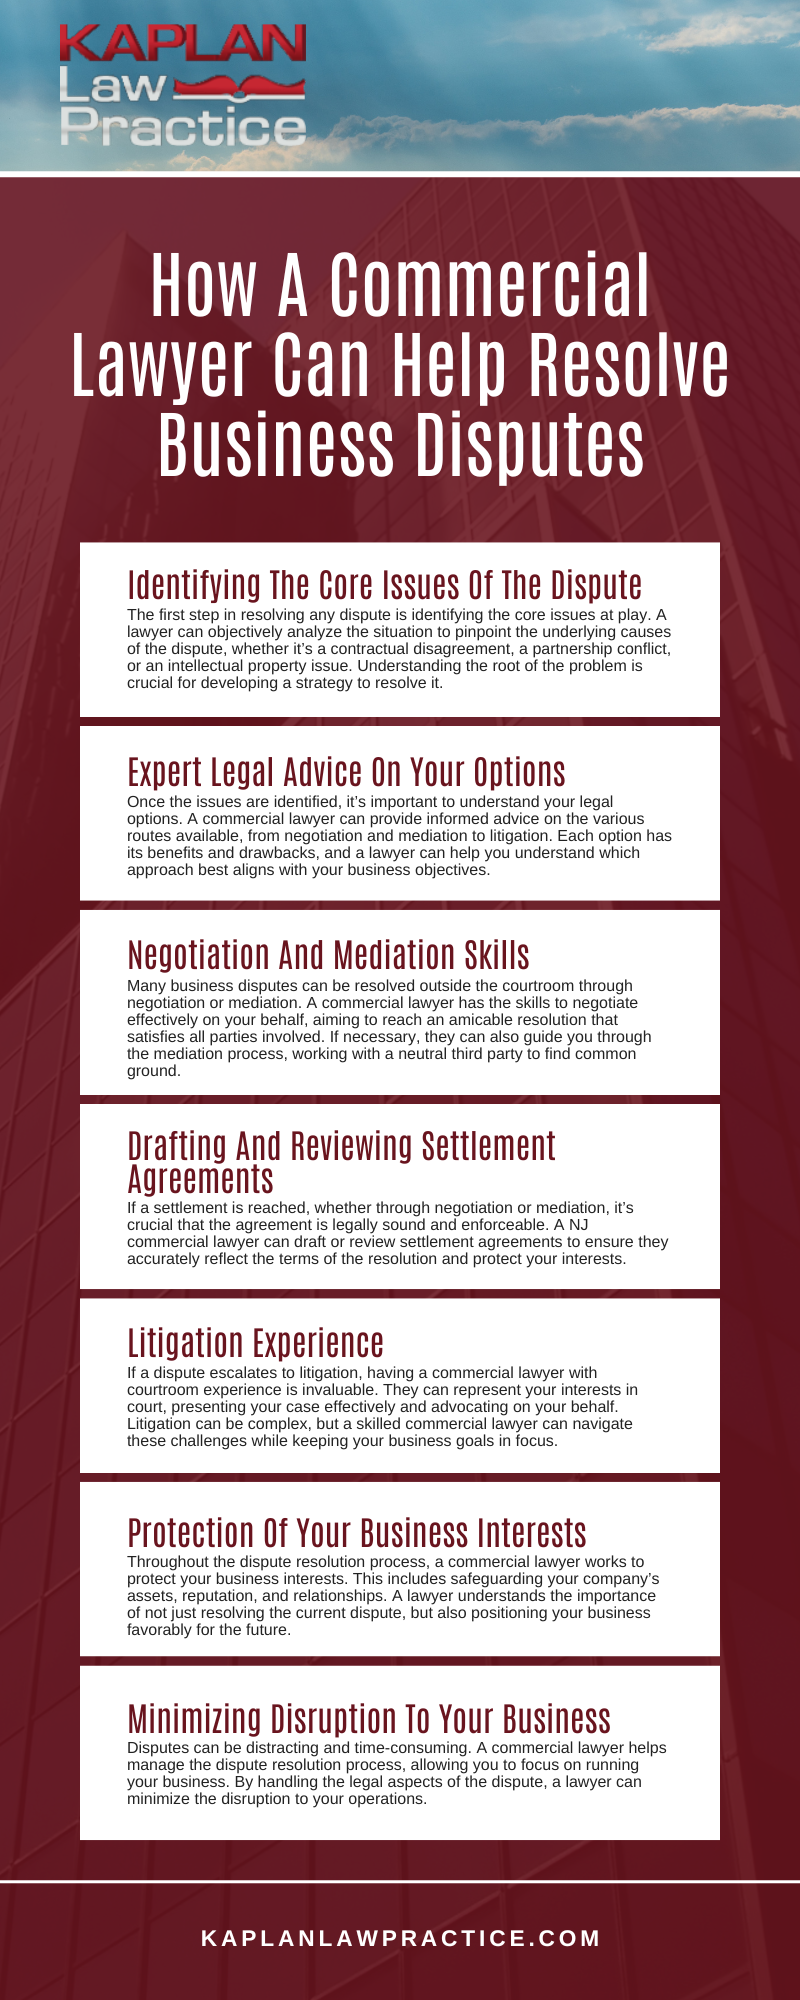 How A Commercial Lawyer Can Help Resolve Business Disputes Infographic